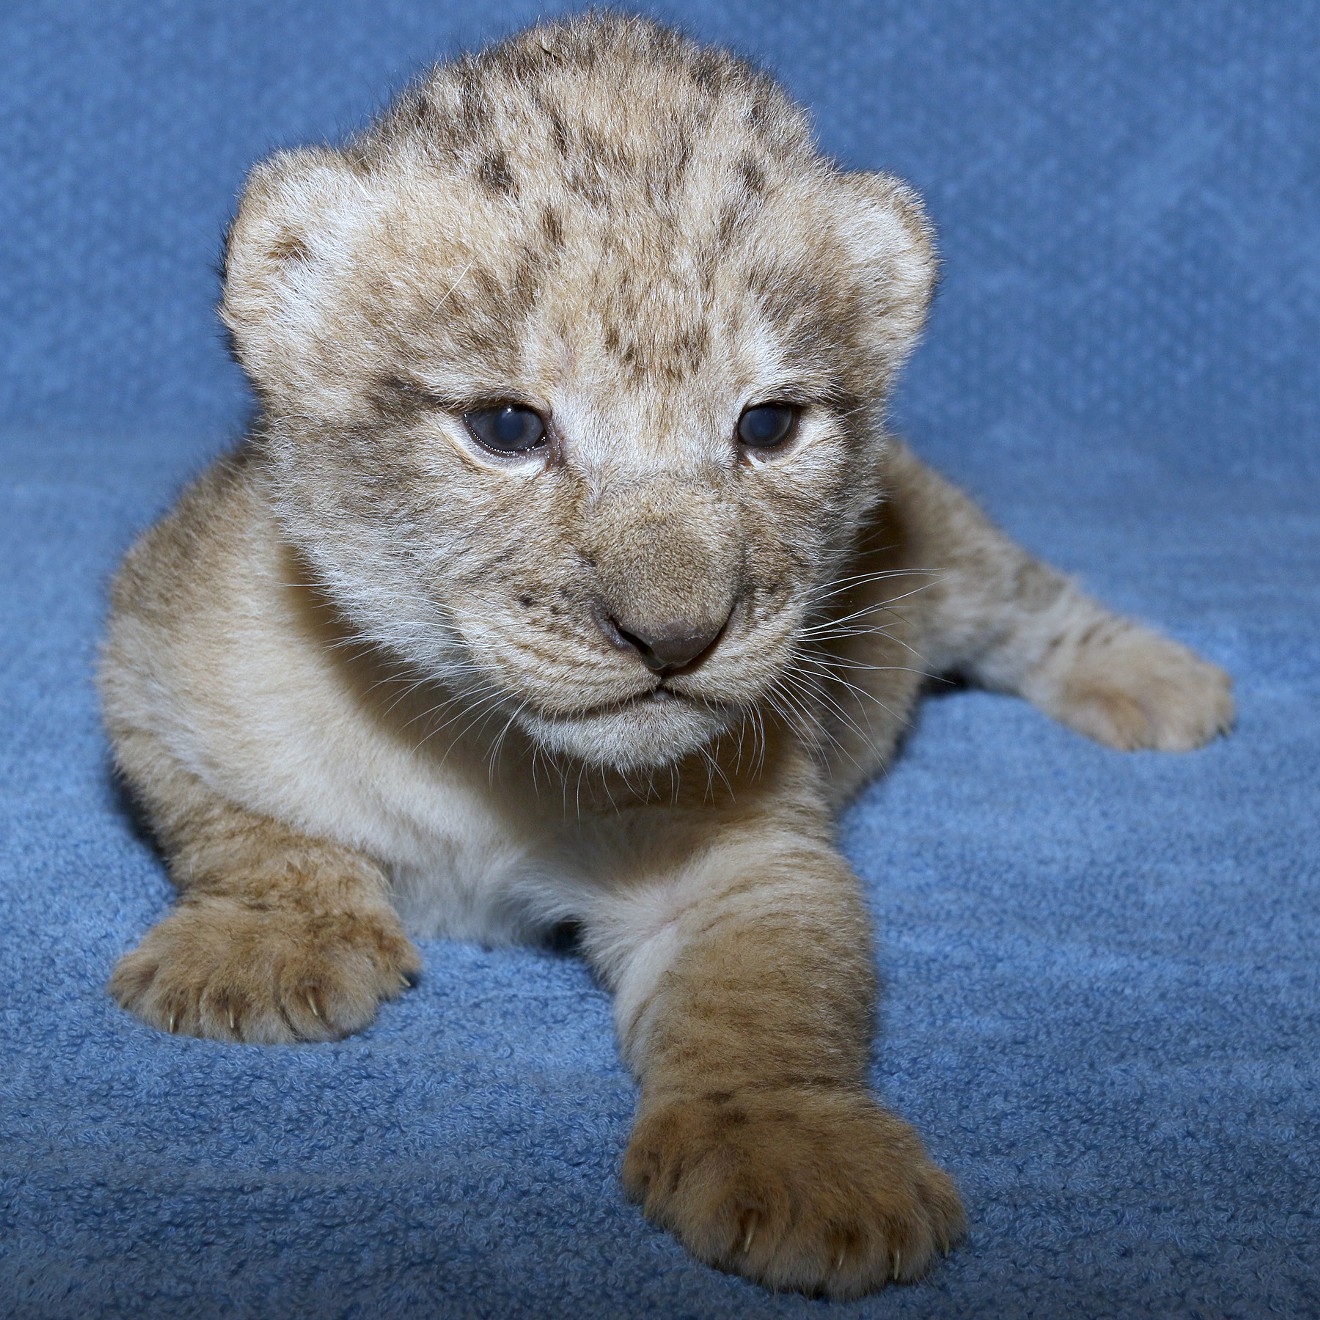 Little Simba was based on videos provided by the Dallas Zoo.